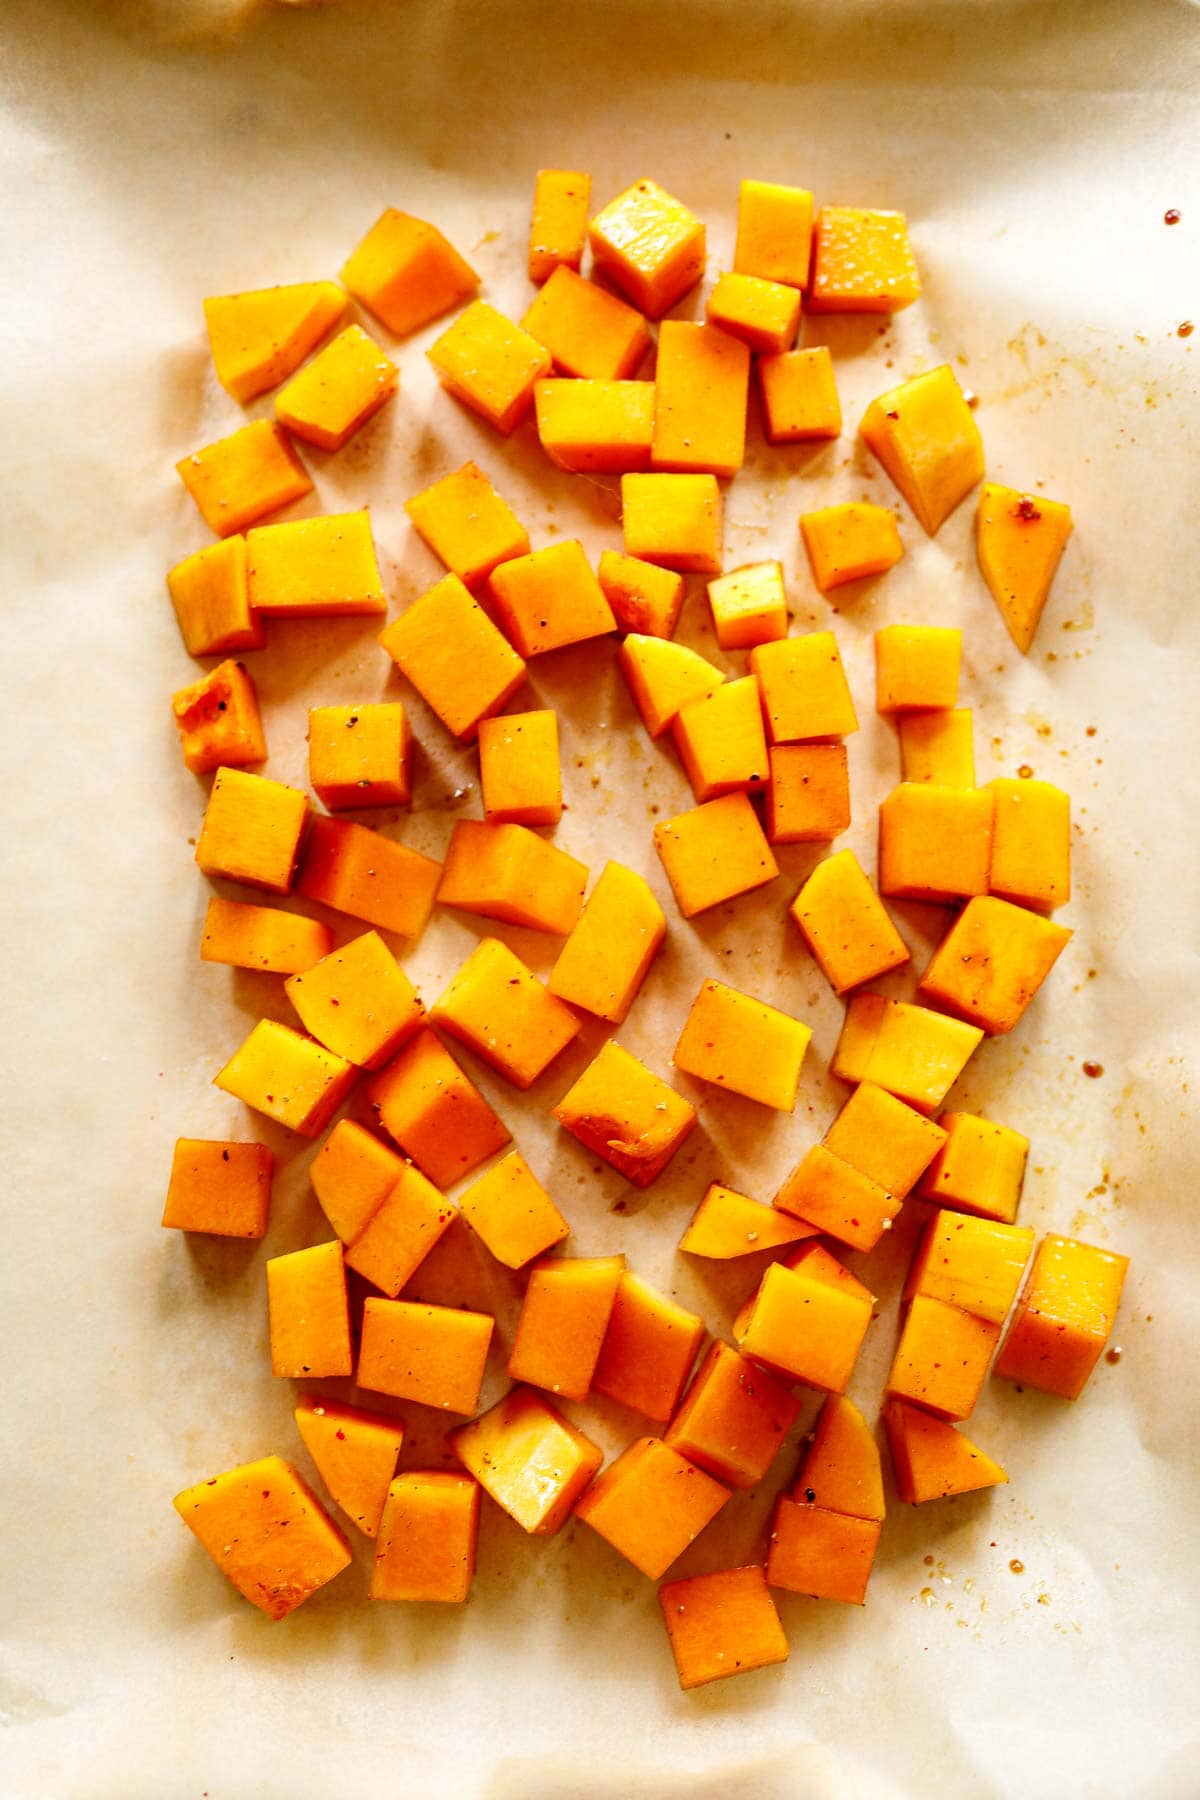 cubed butternut squash spread out on parchment-lined sheet pan with oil and spices